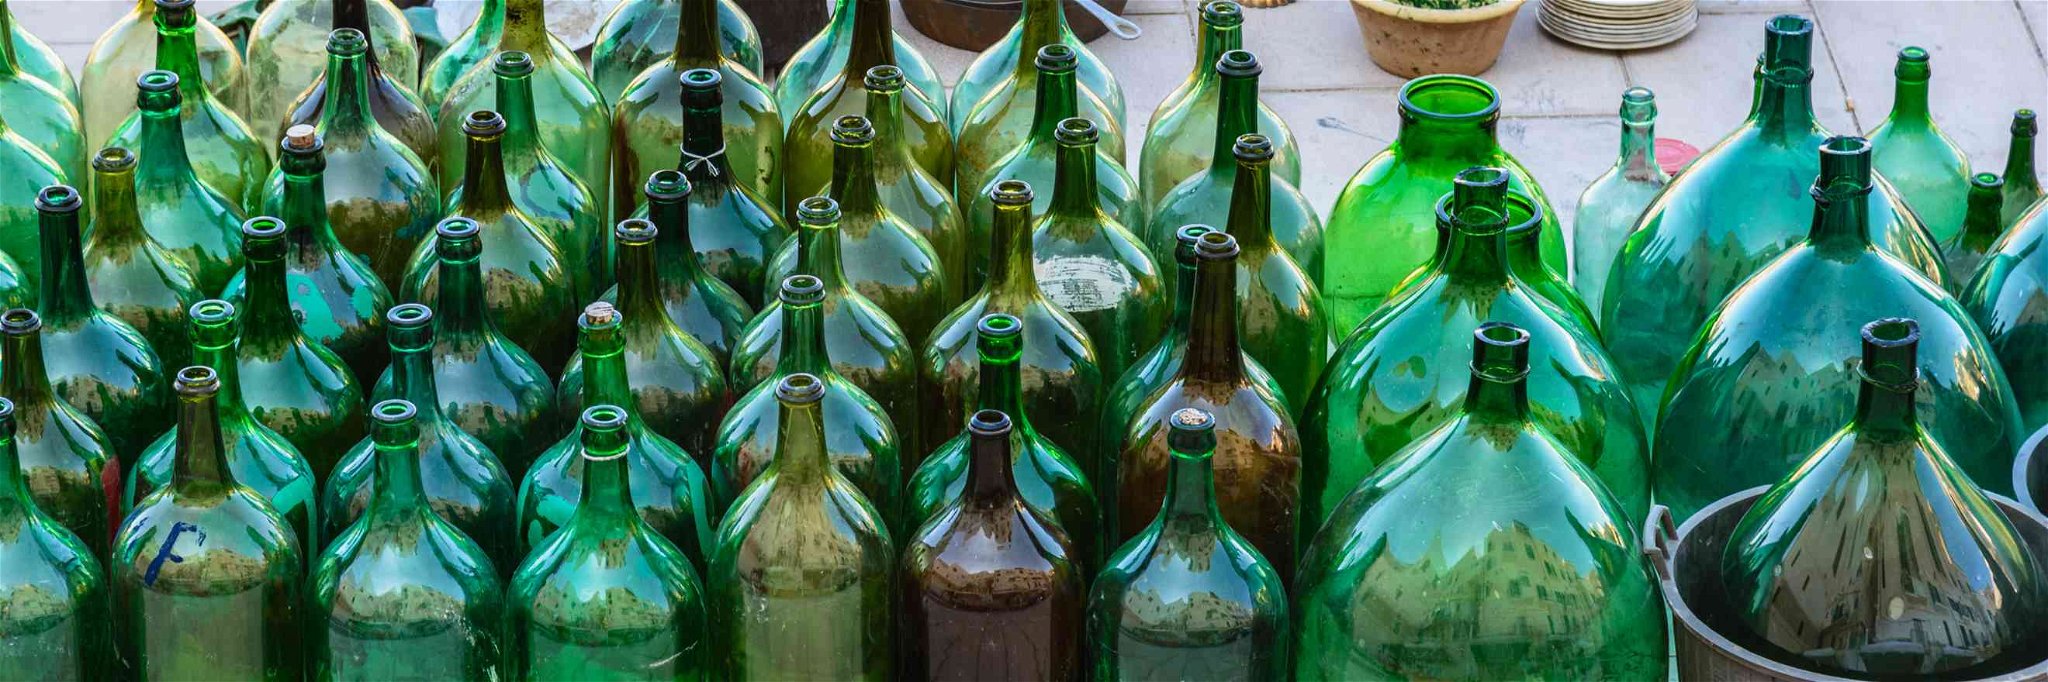 The manufacture of sturdy bottles was key to the evolution of sparkling wines.